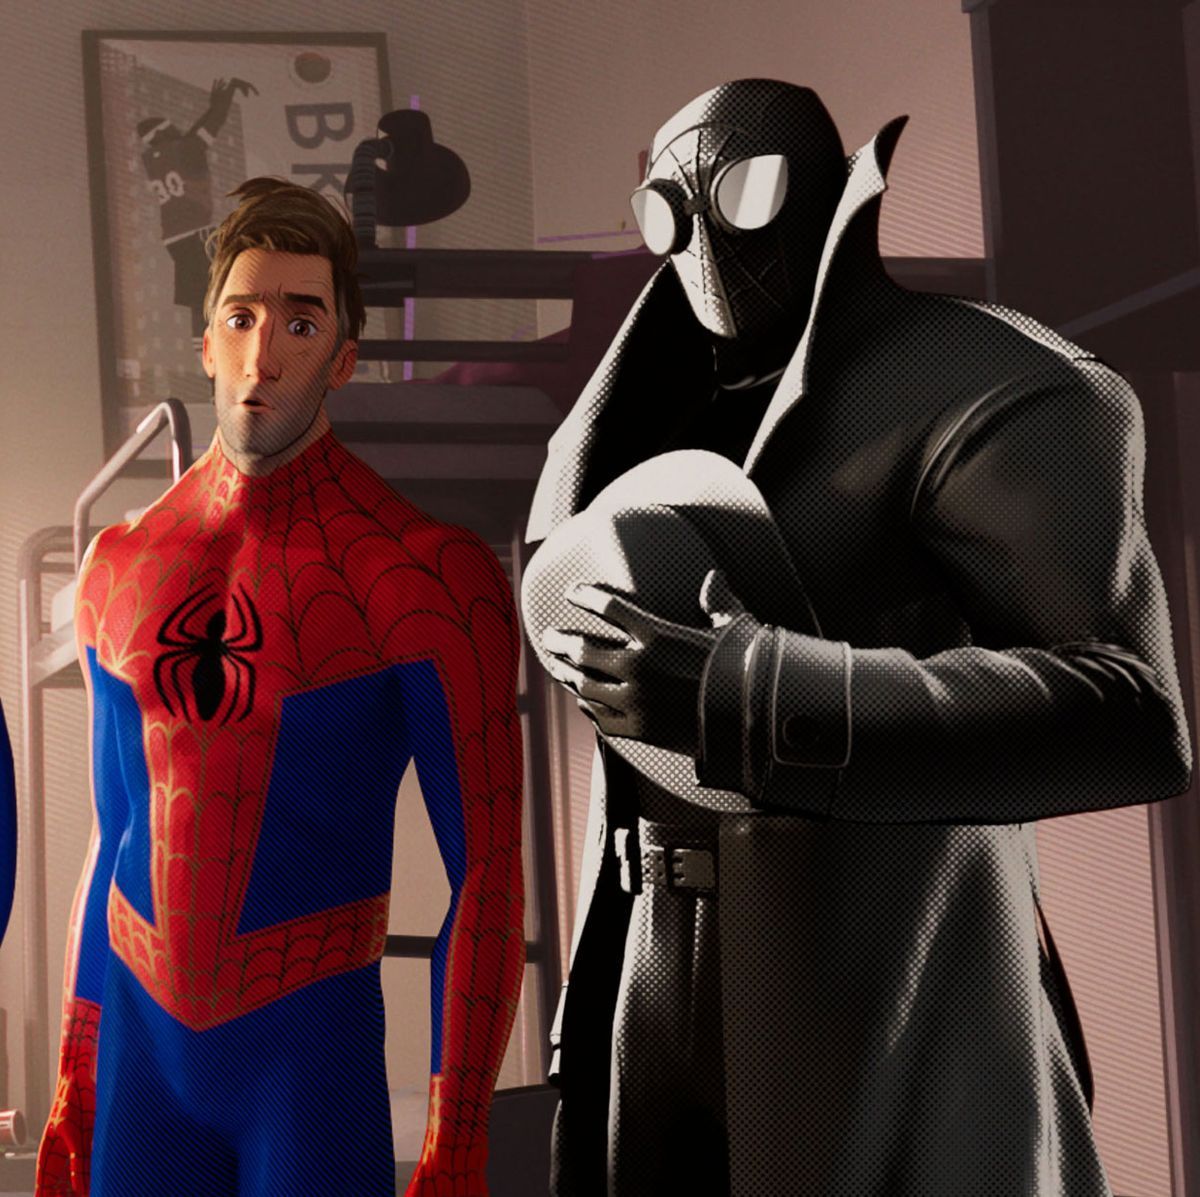 Everything you need to know about Spider-Man: Beyond the Spider-Verse